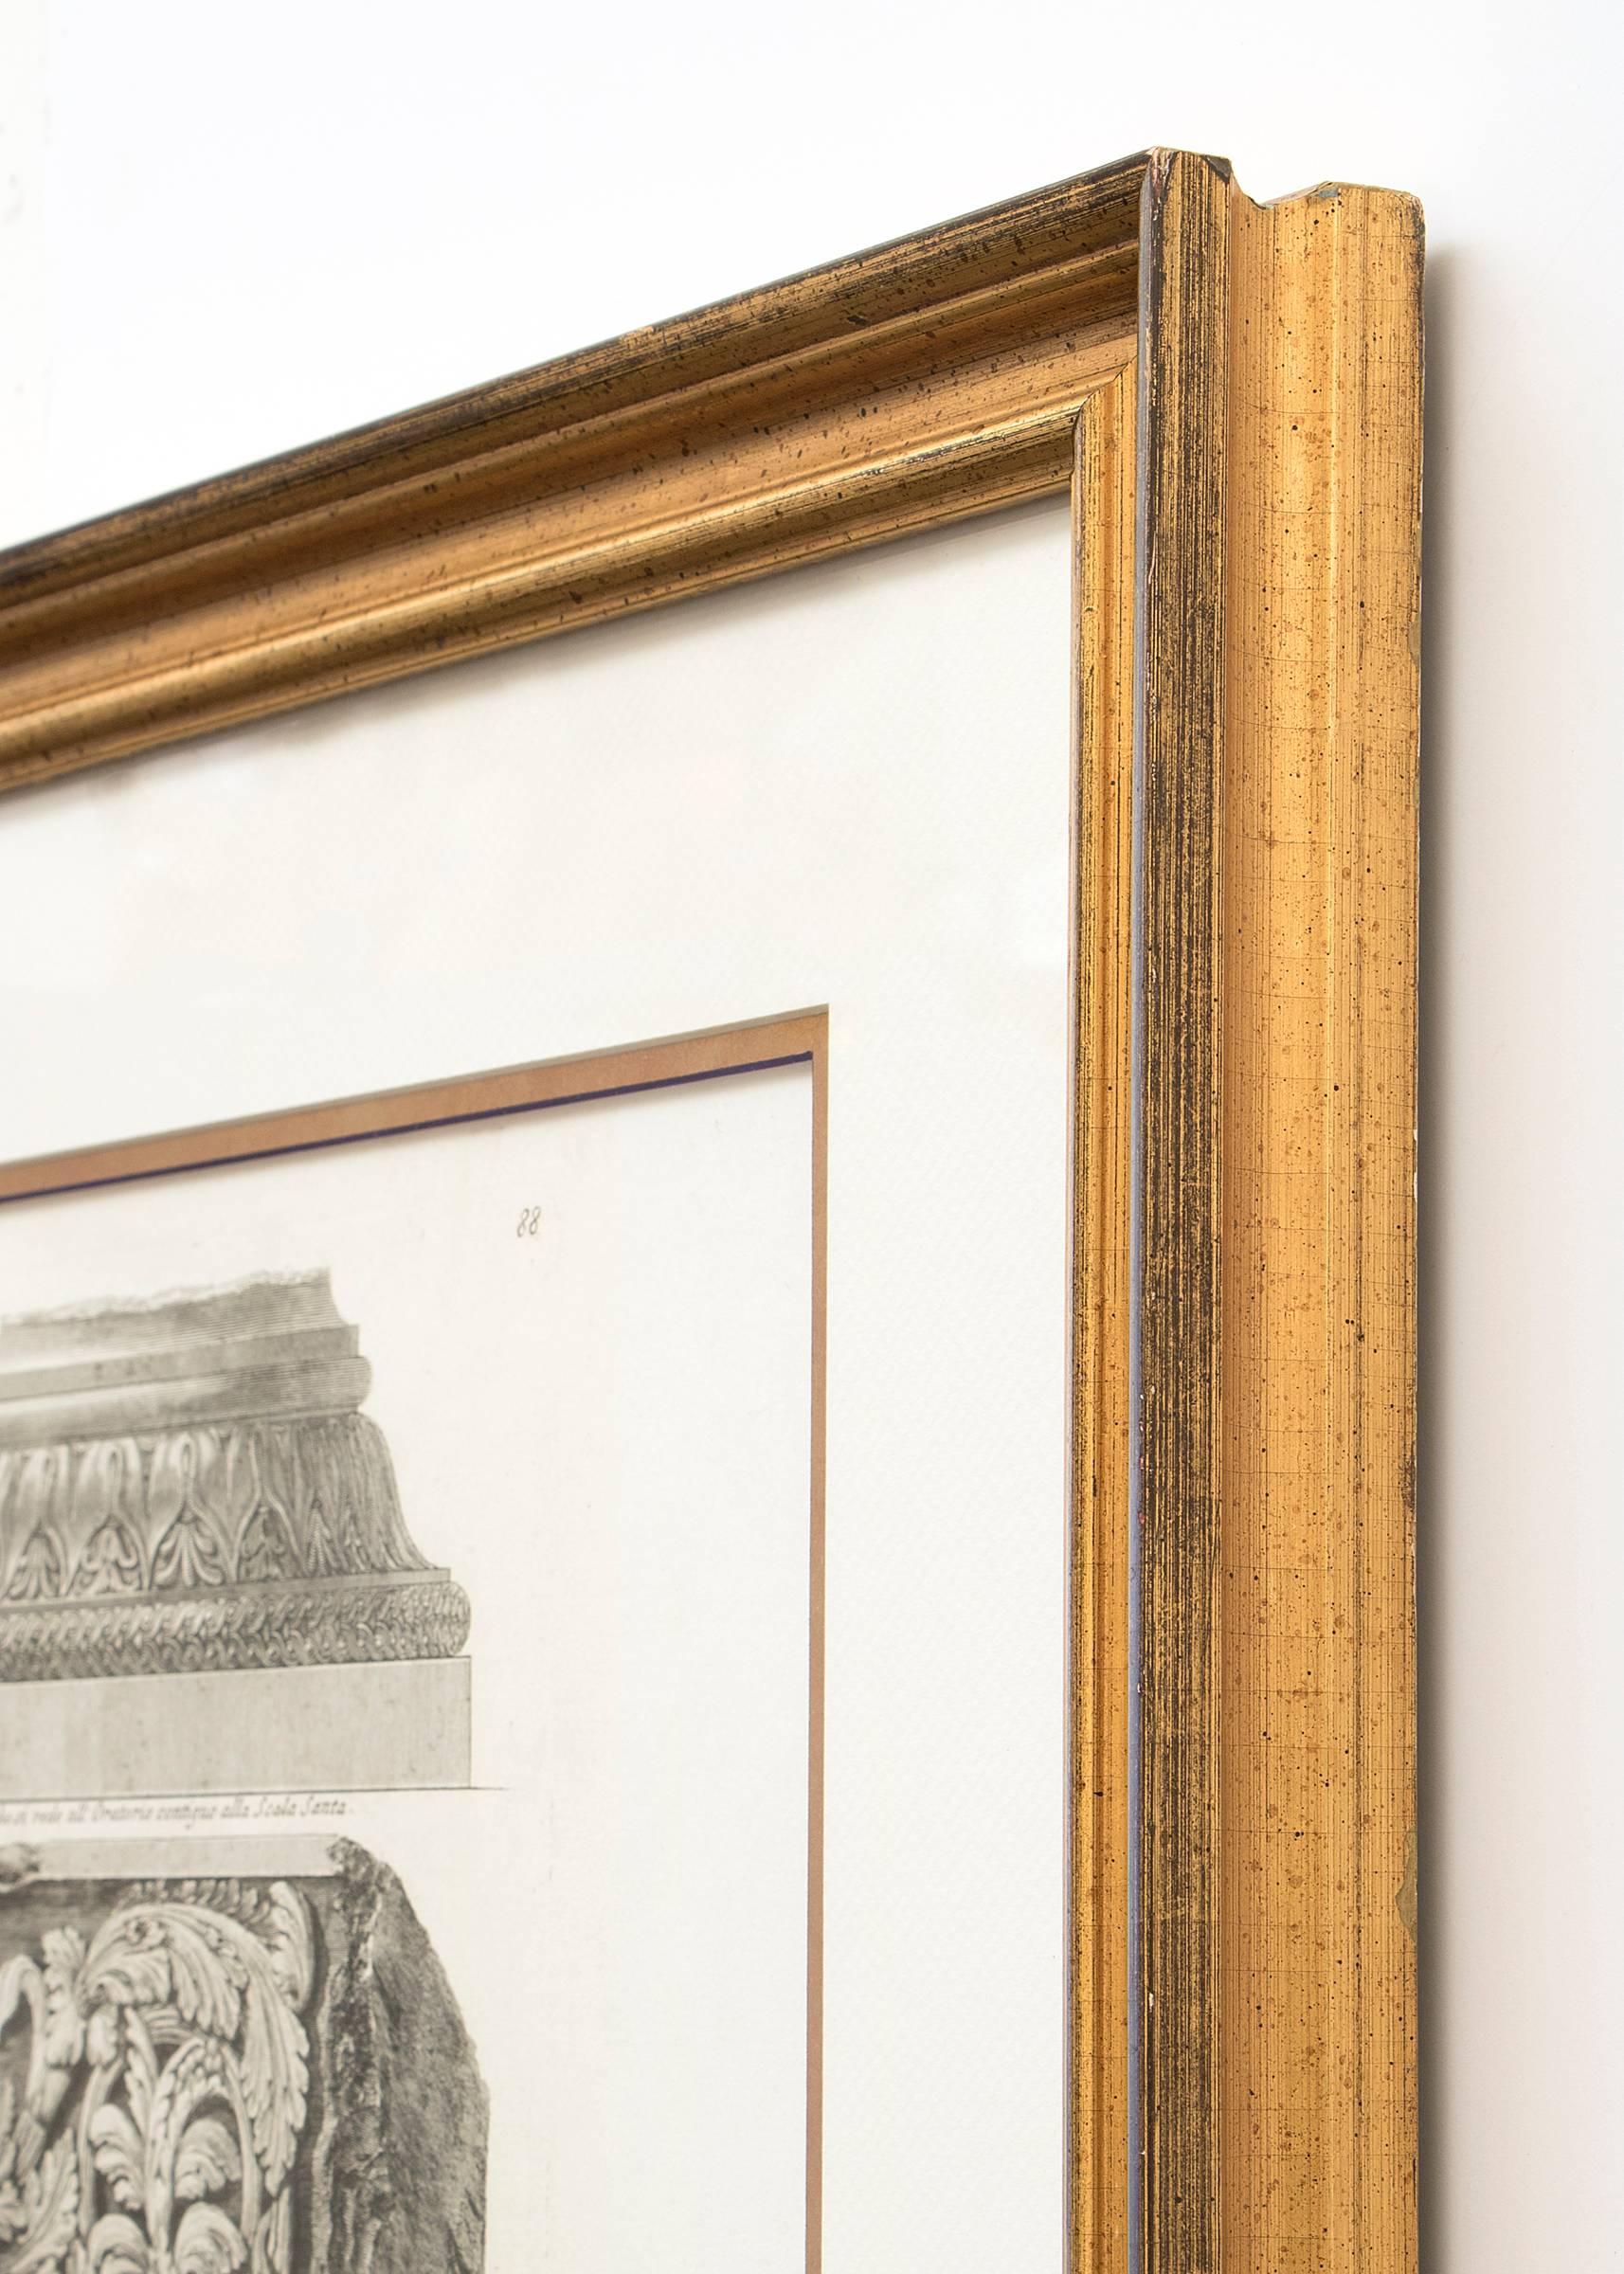 Collection of two 19th century Neoclassical black and white etchings by Giovanni Battista Piranesi housed in gold frames. Left: Giovanni Battista Piranesi, Ornamental Frieze, 19th century, signed lower left.  
Right: Giovanni Battista Piranesi,